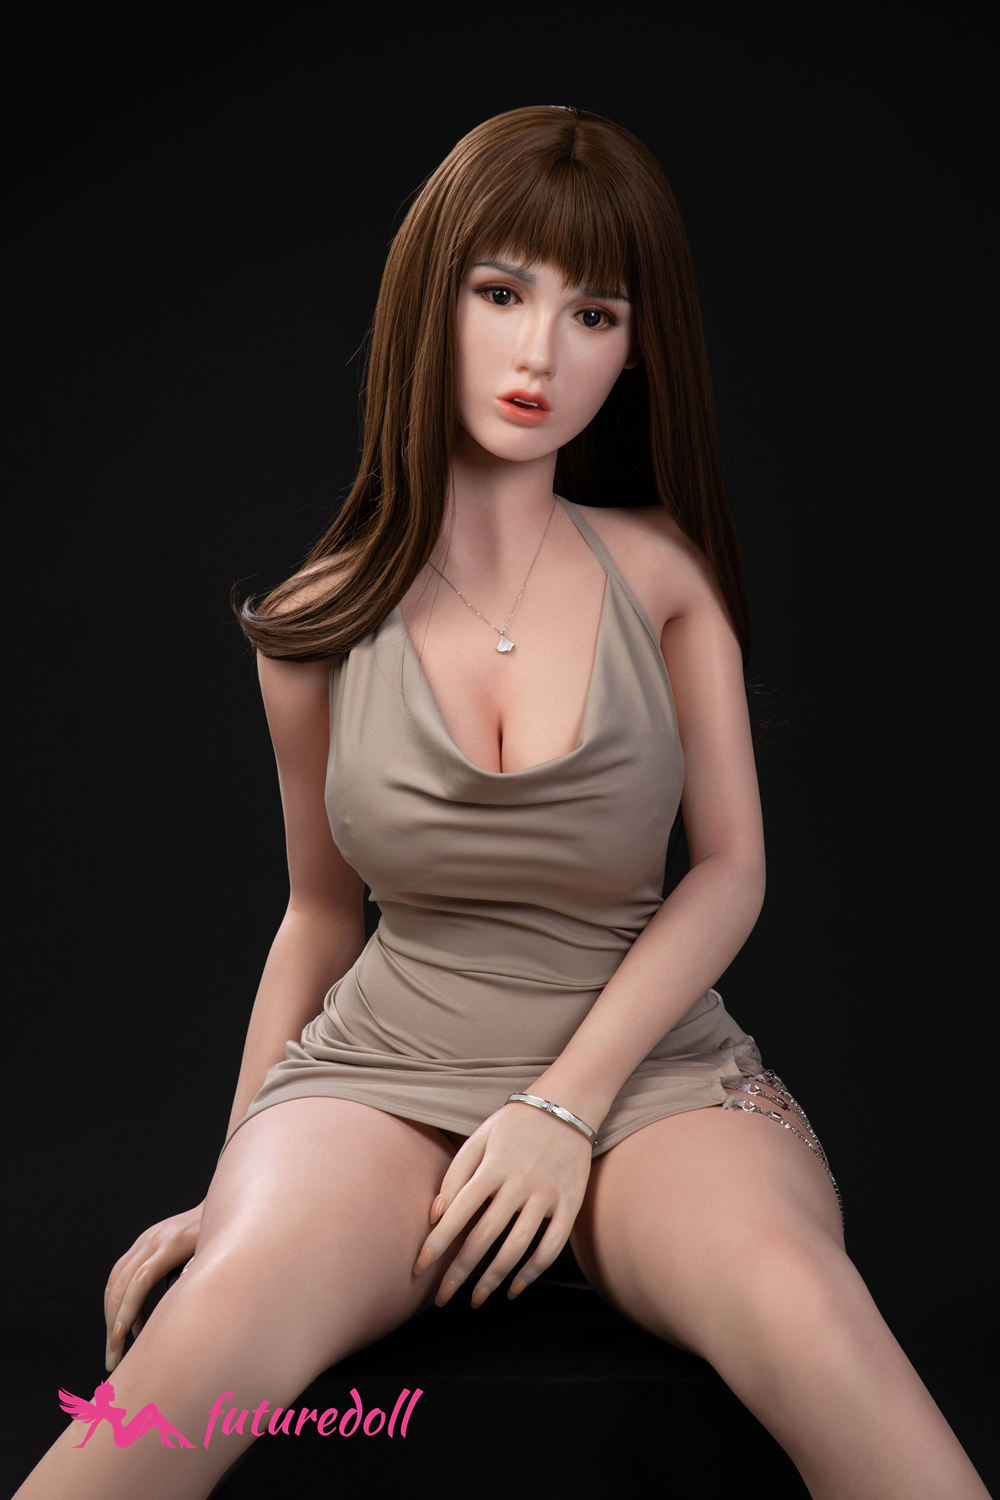 Sexy Real Doll Toy Platinum Silicone Realistic Love Doll Future Doll 163cm Life Size Real Silicone Full Body Sexy Real Doll Toy Platinum Silicone Realistic Love Doll Future Doll 